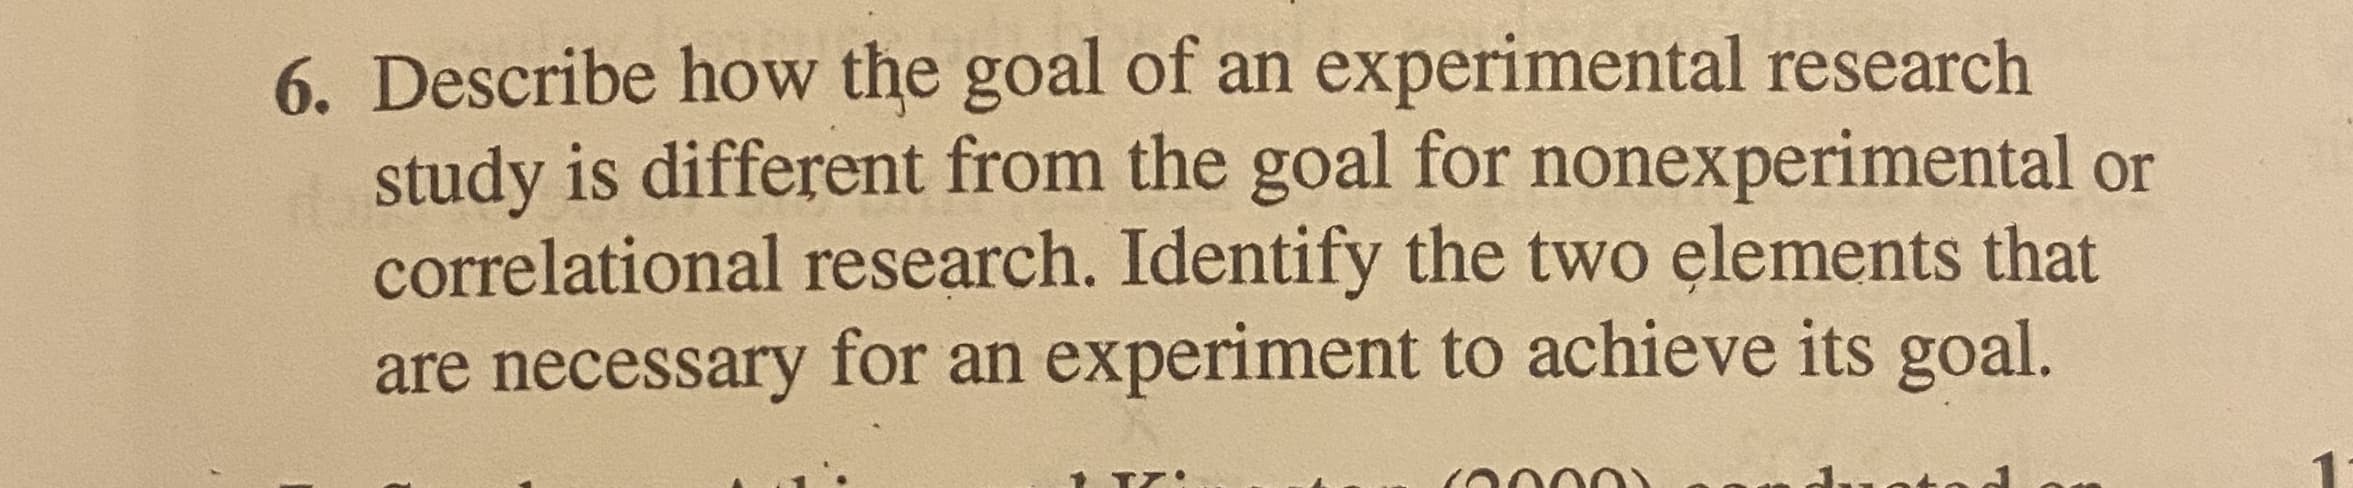 Describe how the goal of an experimental research
study is different from the goal for nonexperimental or
correlational research. Identify the two elements that
are necessary for an experiment to achieve its goal.
